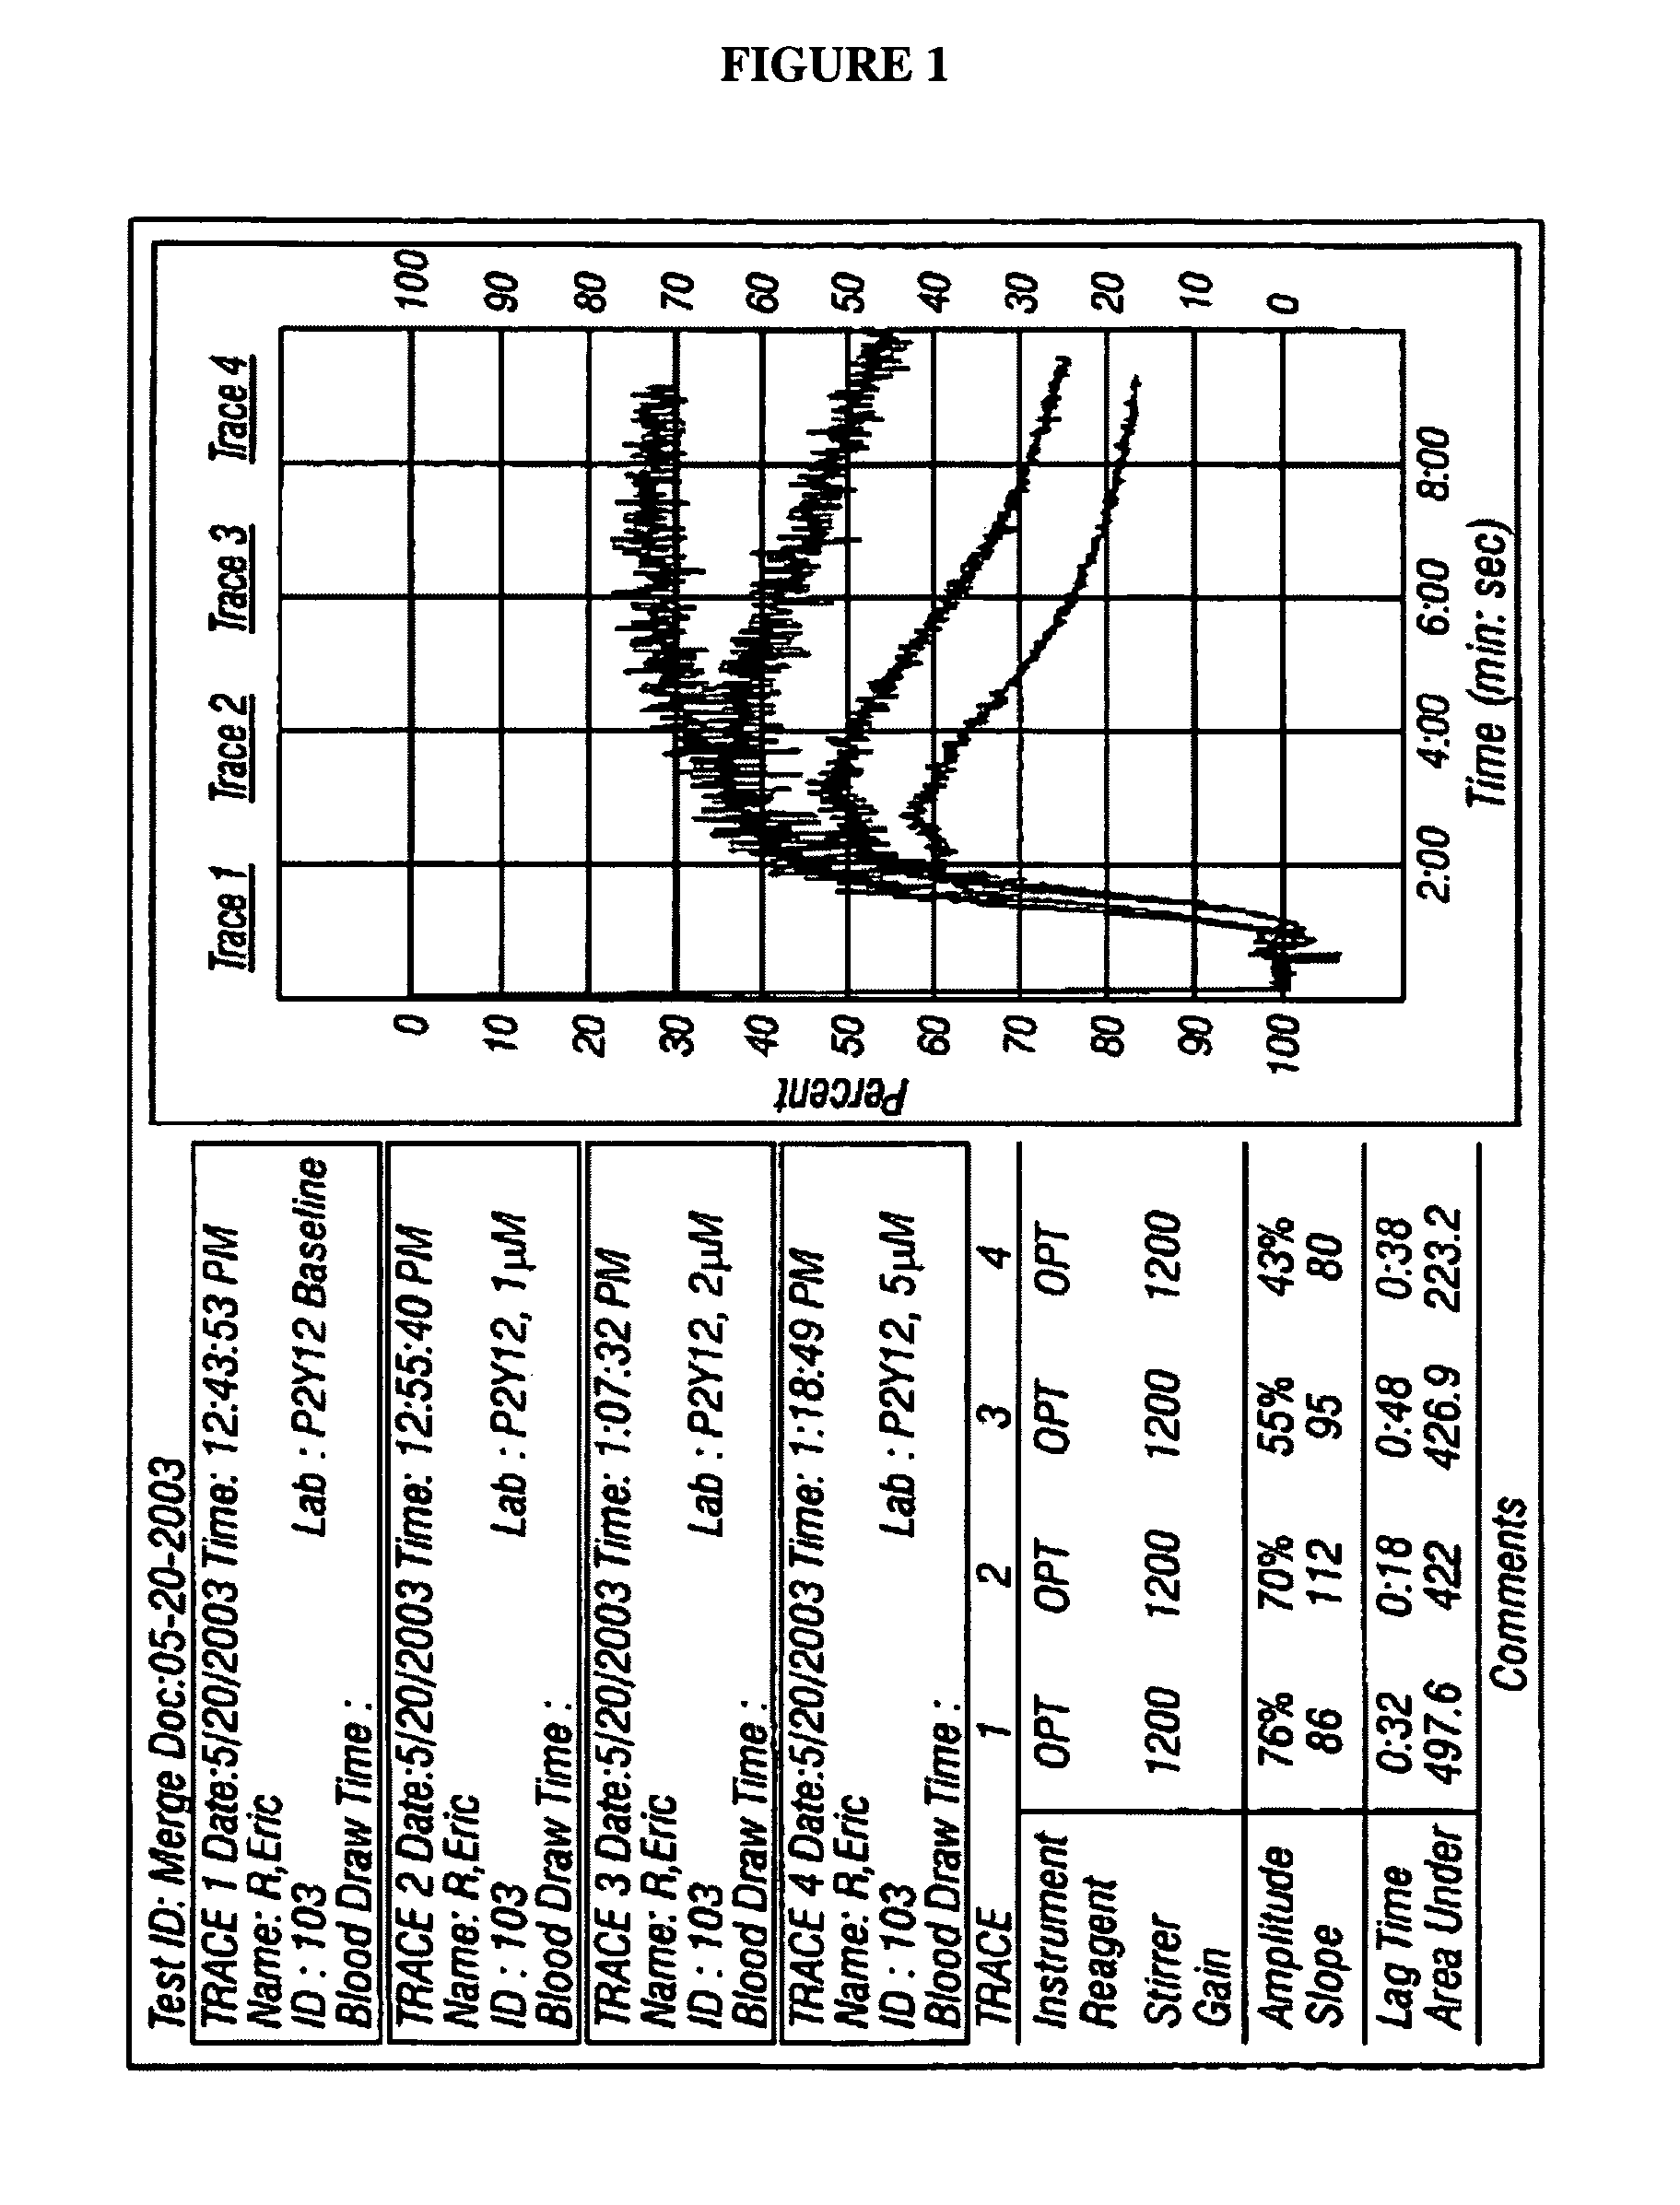 Methods for measuring platelet reactivity of individuals treated with drug eluting stents